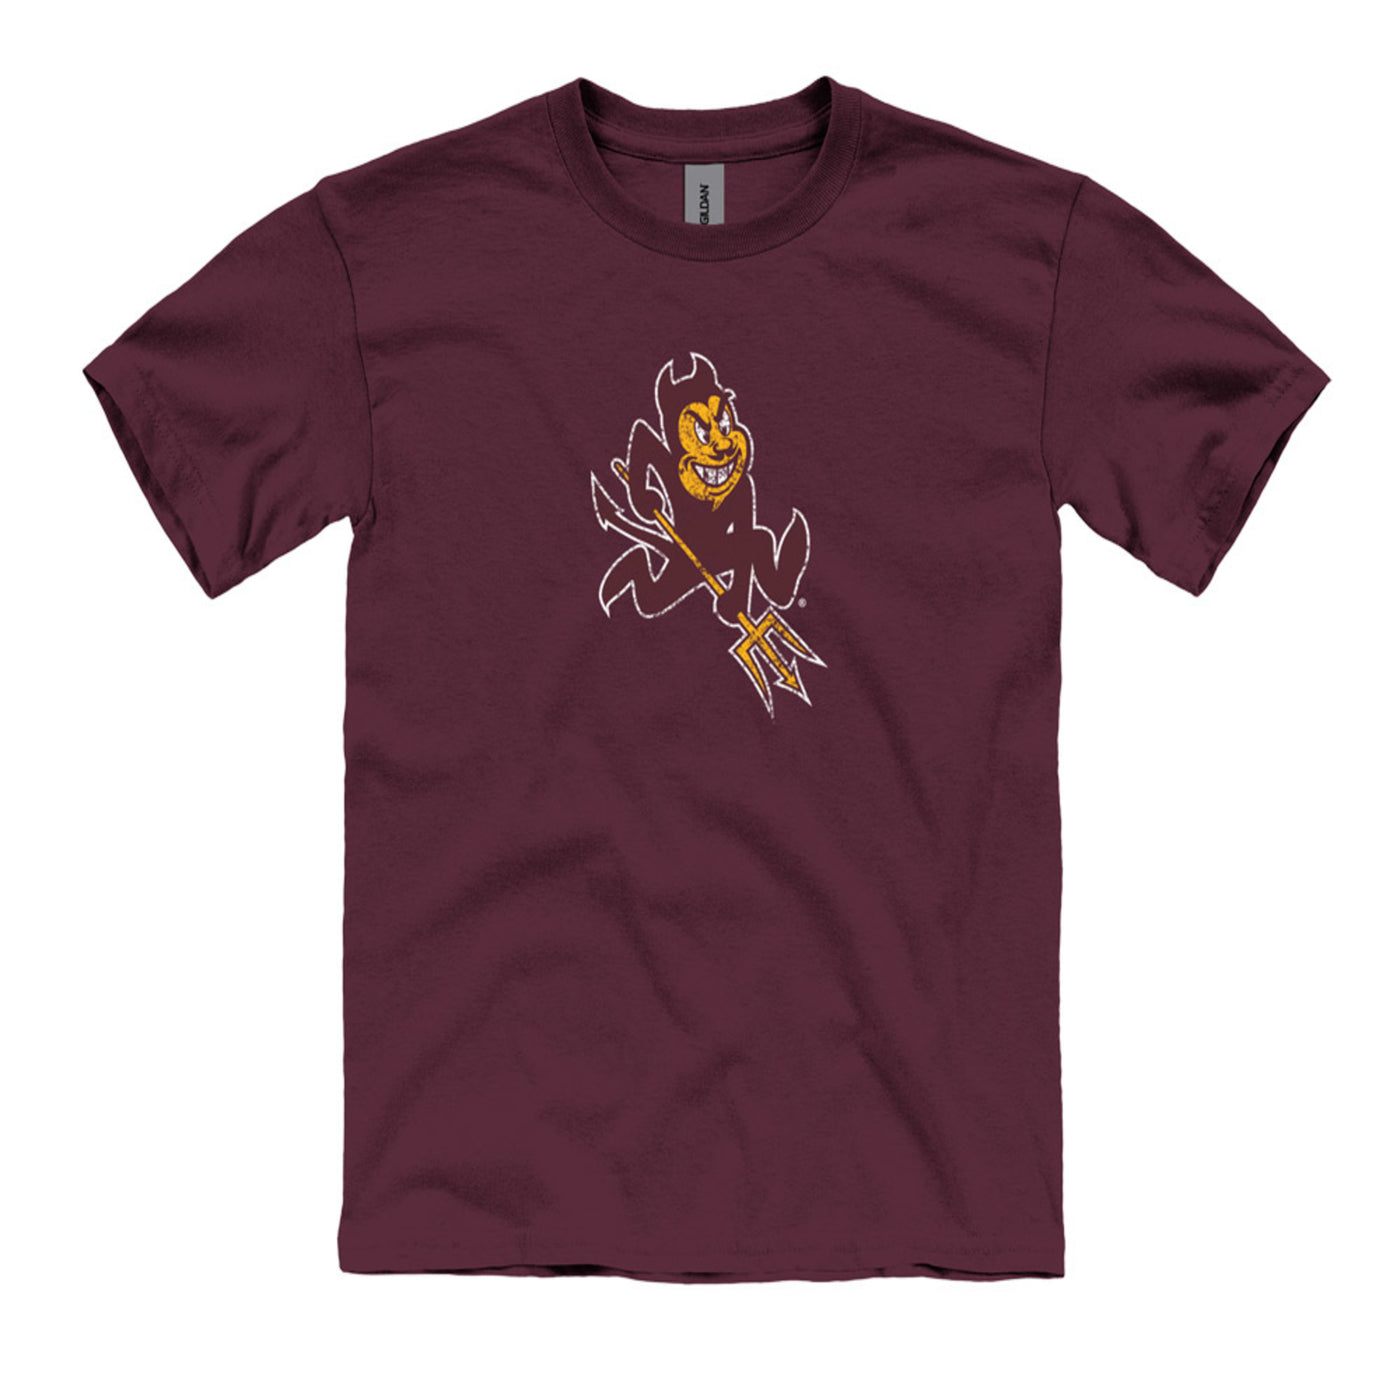 ASU maroon youth t-shirt with a sparky mascot on the front.